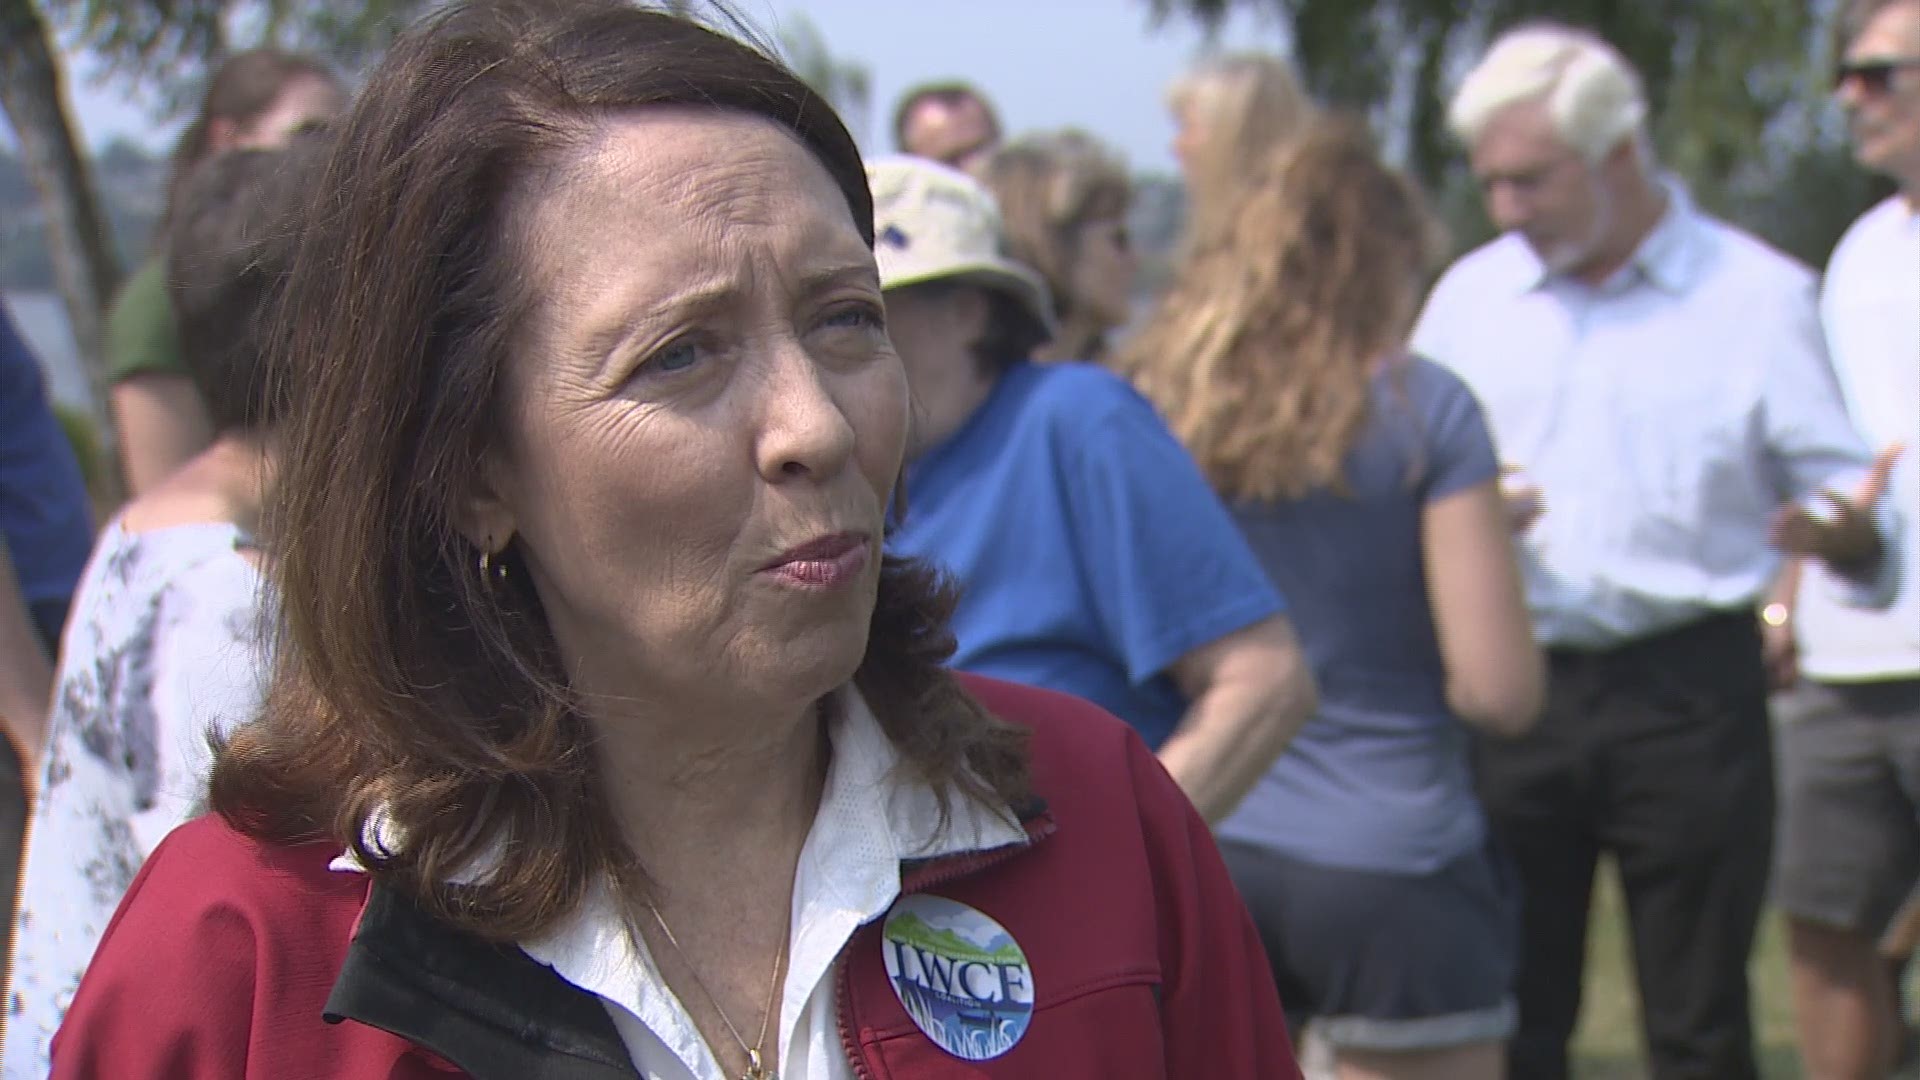 Sen. Maria Cantwell spoke to KING 5 on Monday, calling for a hearing into the plane stolen from Sea-Tac International Airport